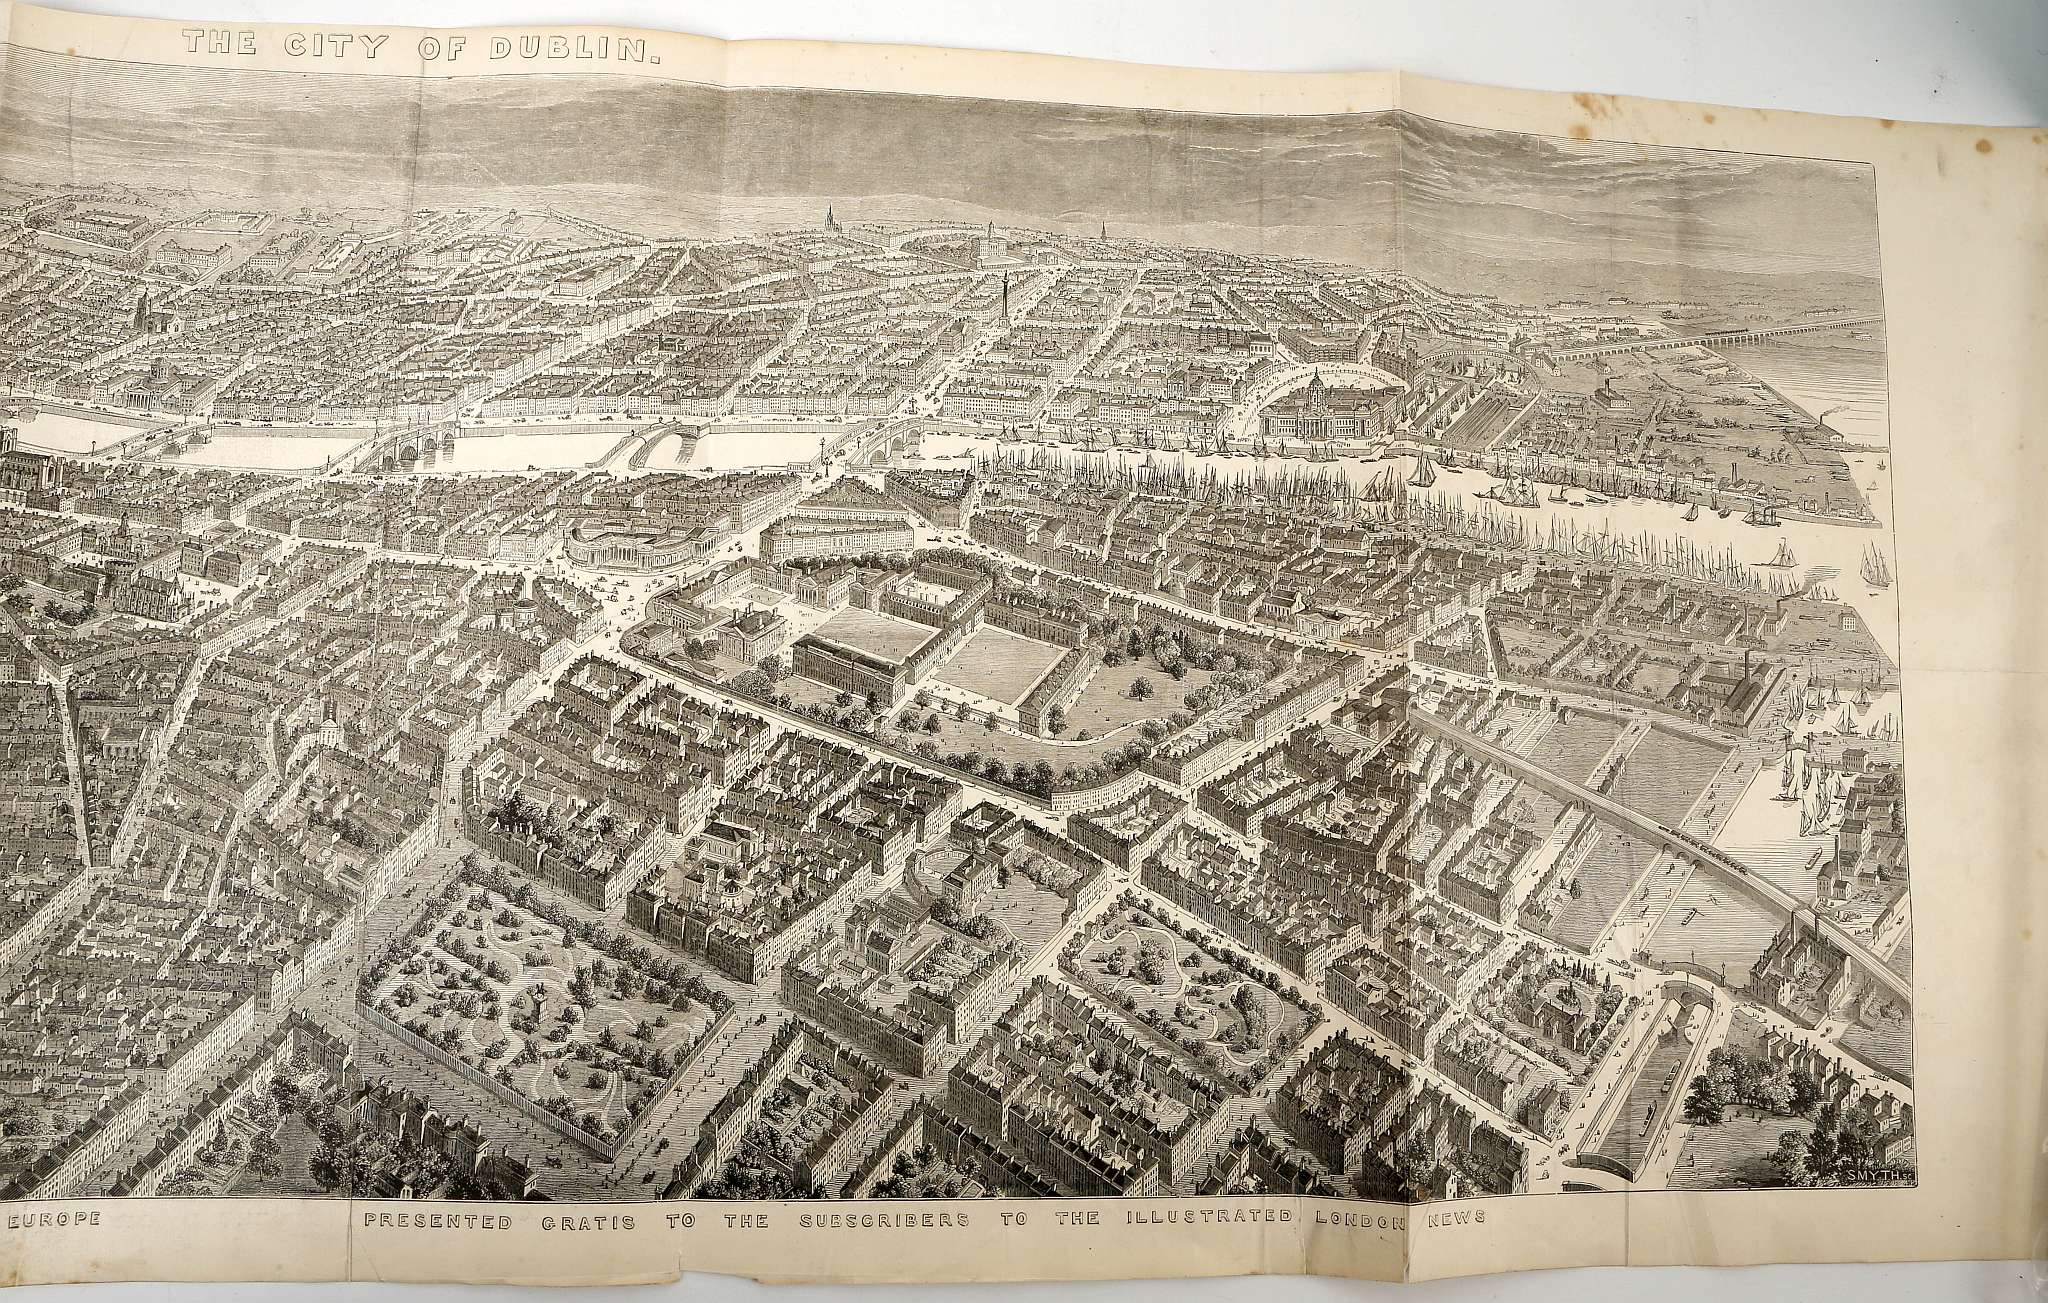 A fine panorama of Dublin 1846 - IRELAND – DUBLIN – supplement to the Illustrated London News - Image 2 of 3